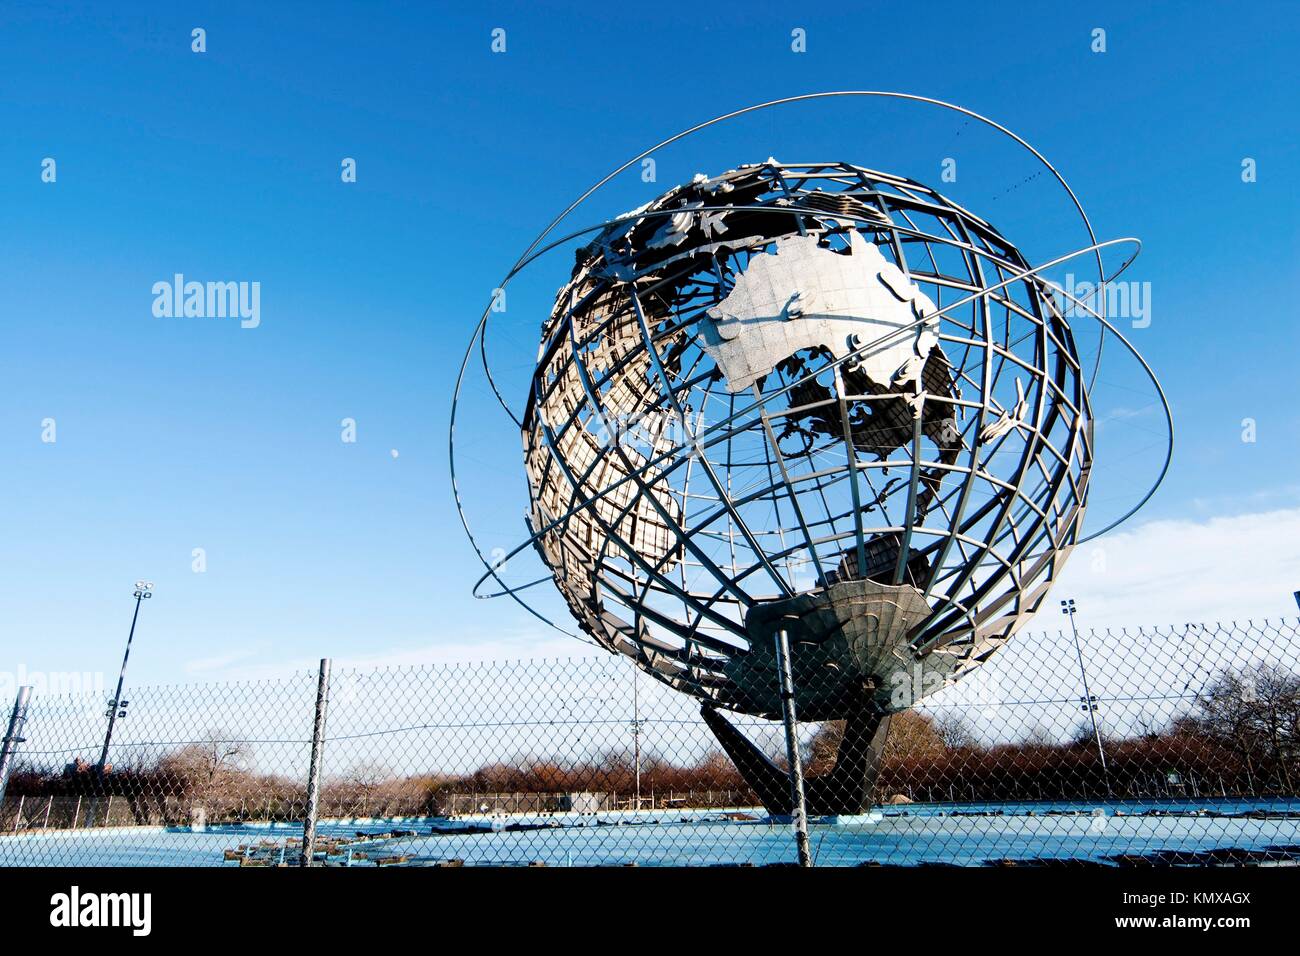 The Earth World Unisphere globe in Flushing Meadows Corona Park in Queens New York at a bright sunny day with blue skies Stock Photo